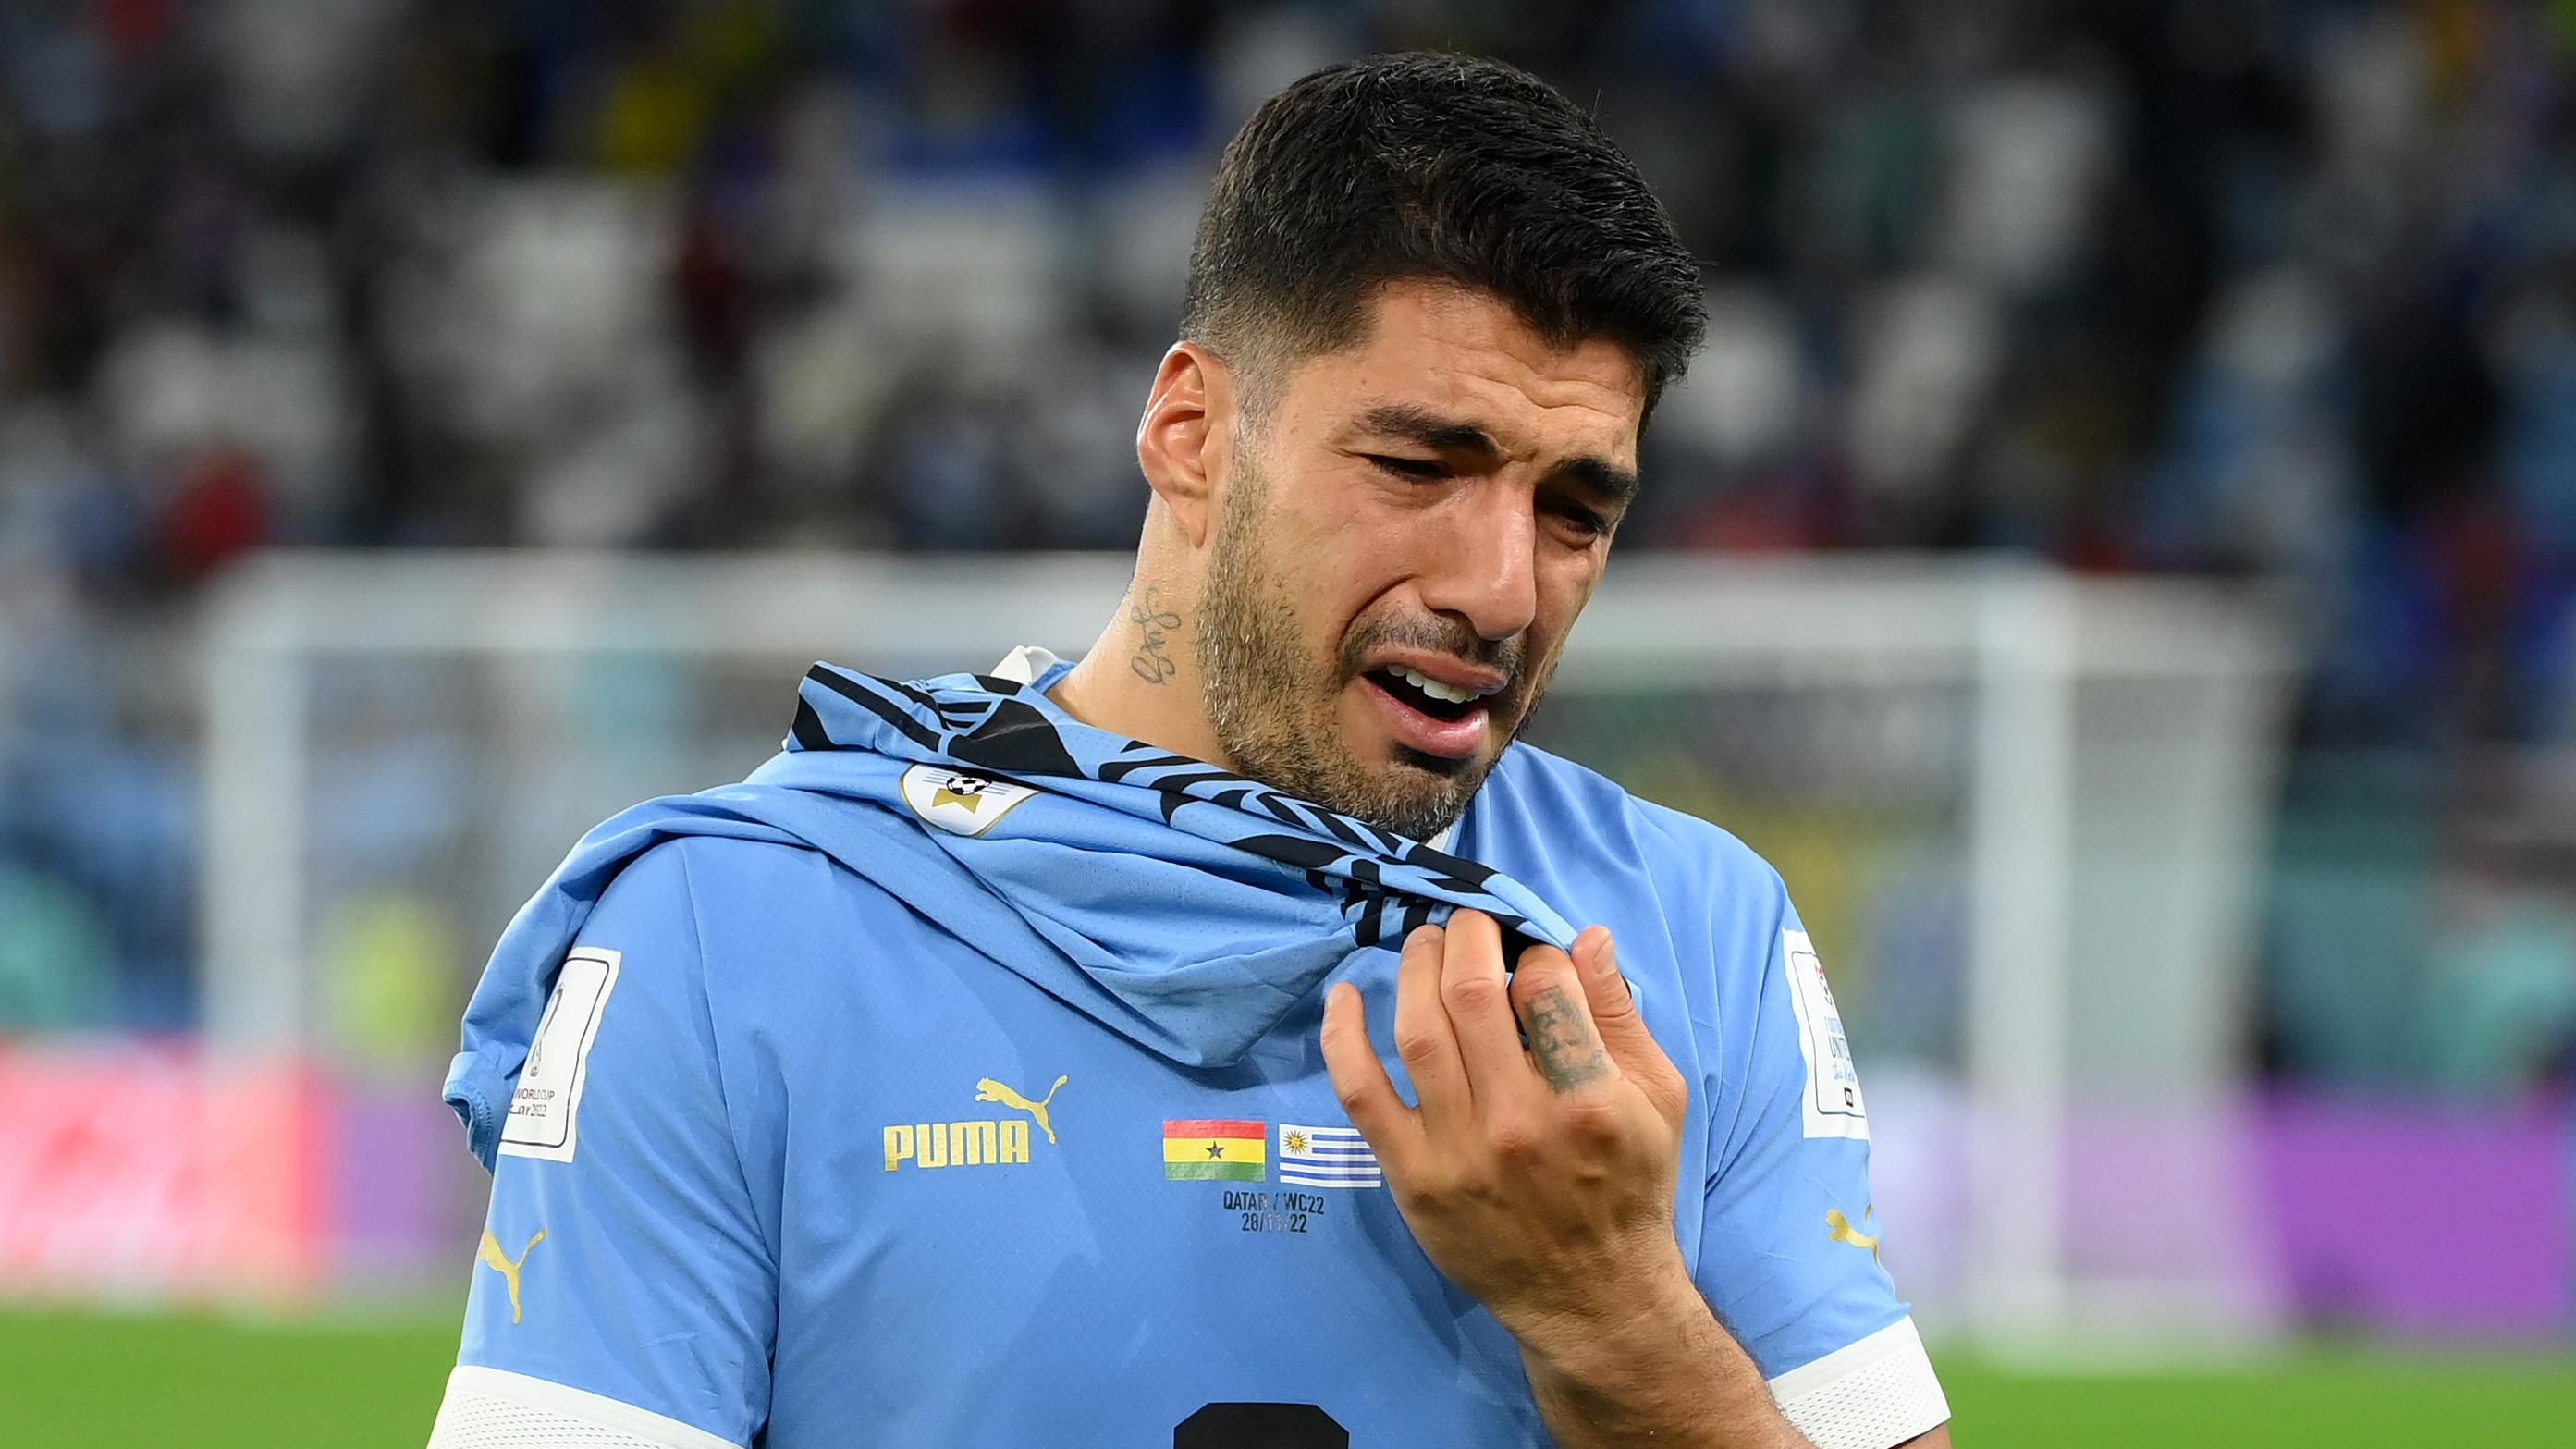 Uruguayan forward Suárez: It hurts to say goodbye to the World Cup like this, but we are calm at heart